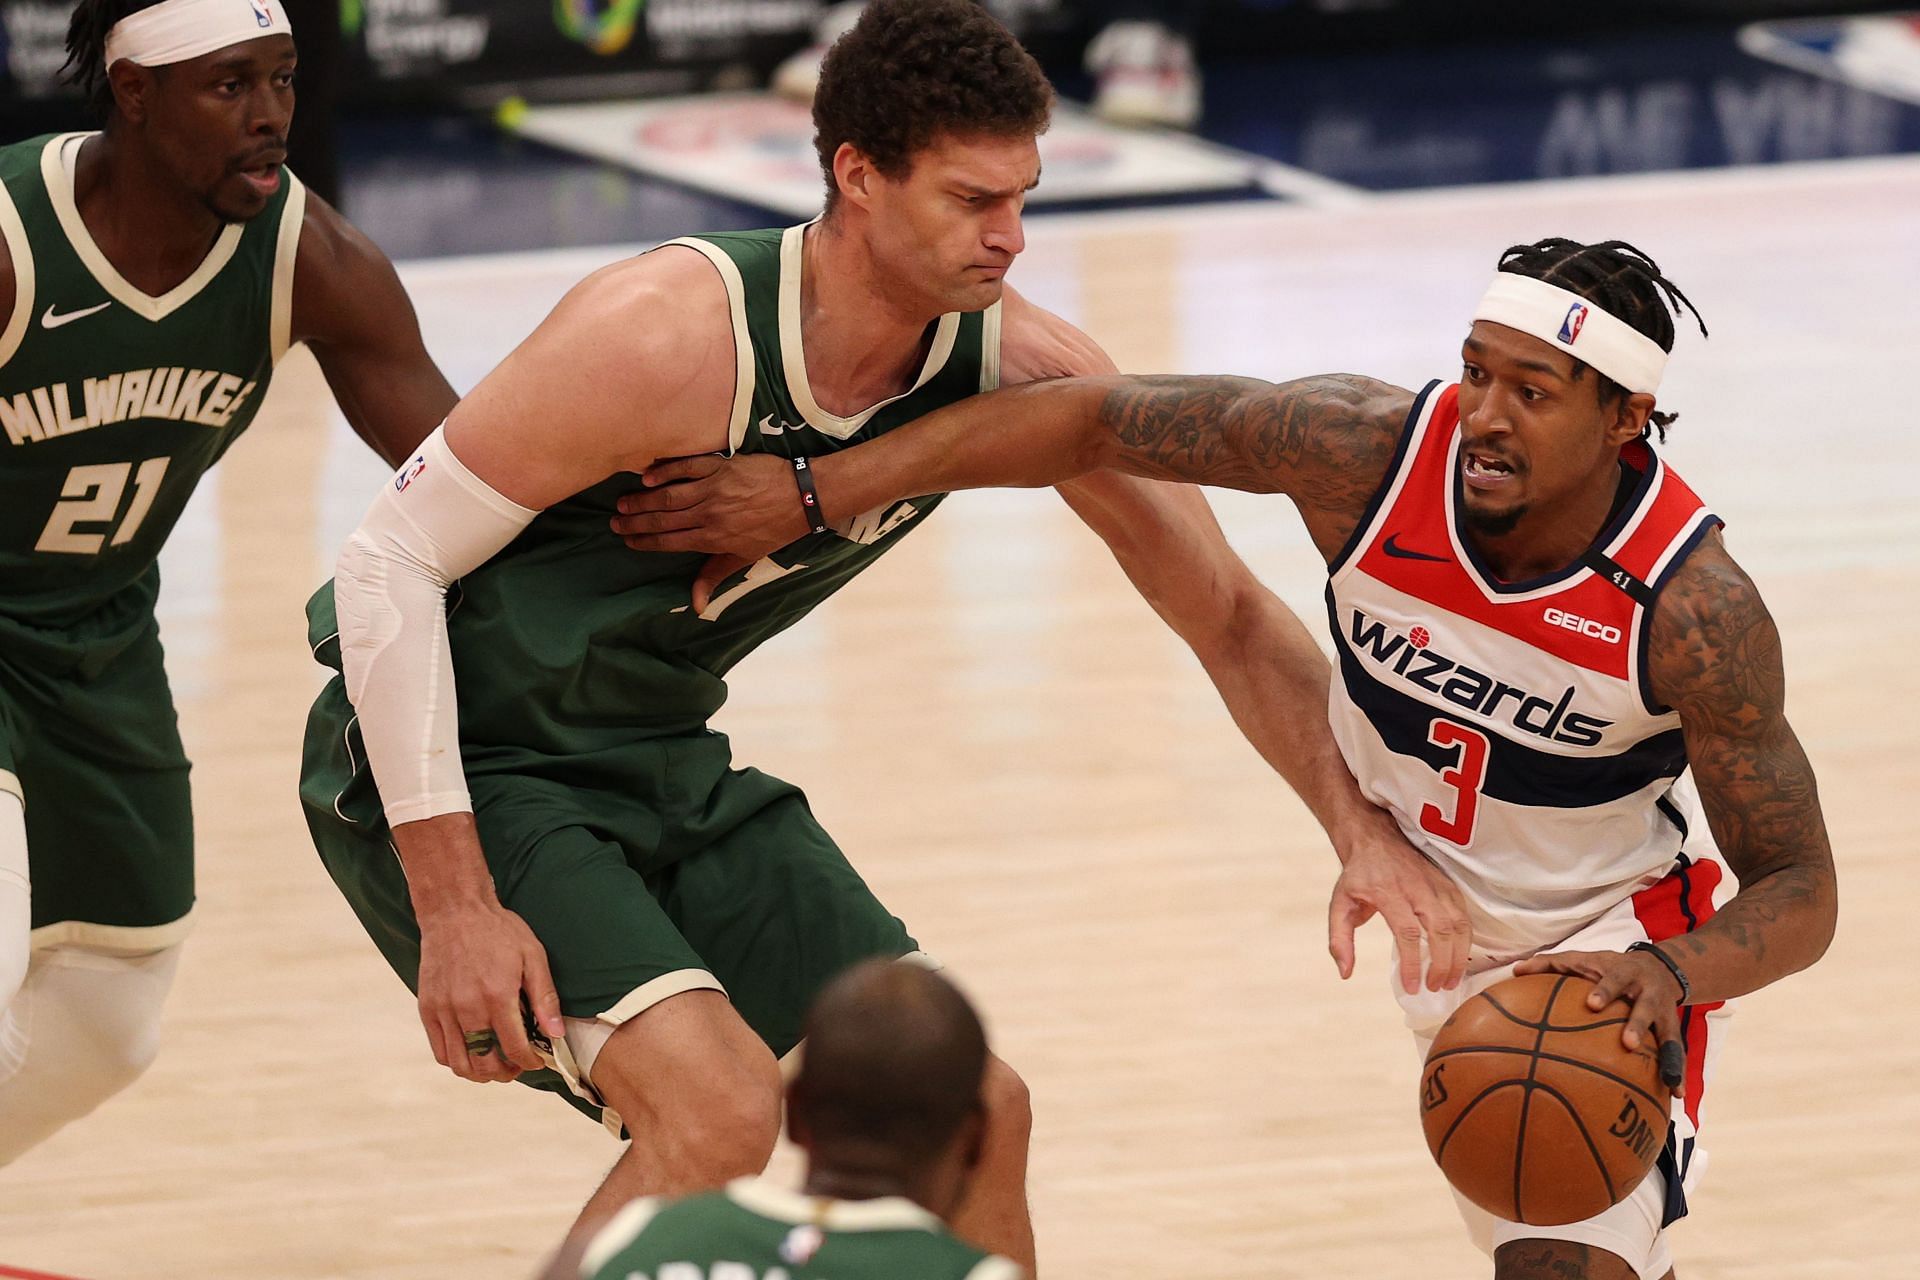 Bradley Beal #3 of the Washington Wizards dribbles past Brook Lopez #11 of the Milwaukee Bucks during the second half at Capital One Arena on March 15, 2021 in Washington, DC.